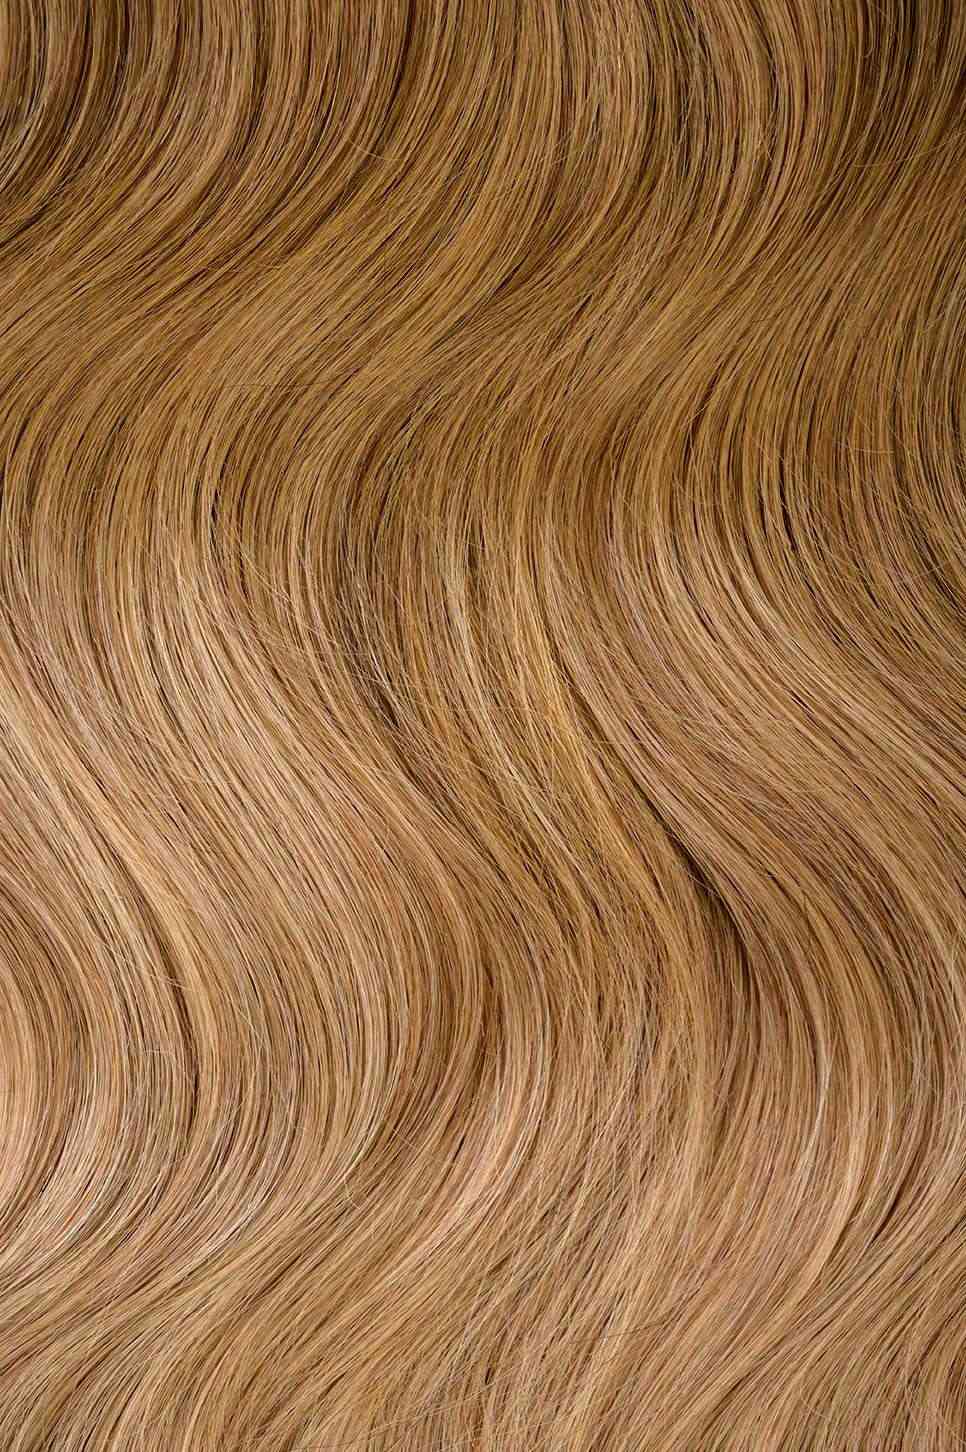 #Chestnut Brown Balayage Invisi Tape-In Extensions